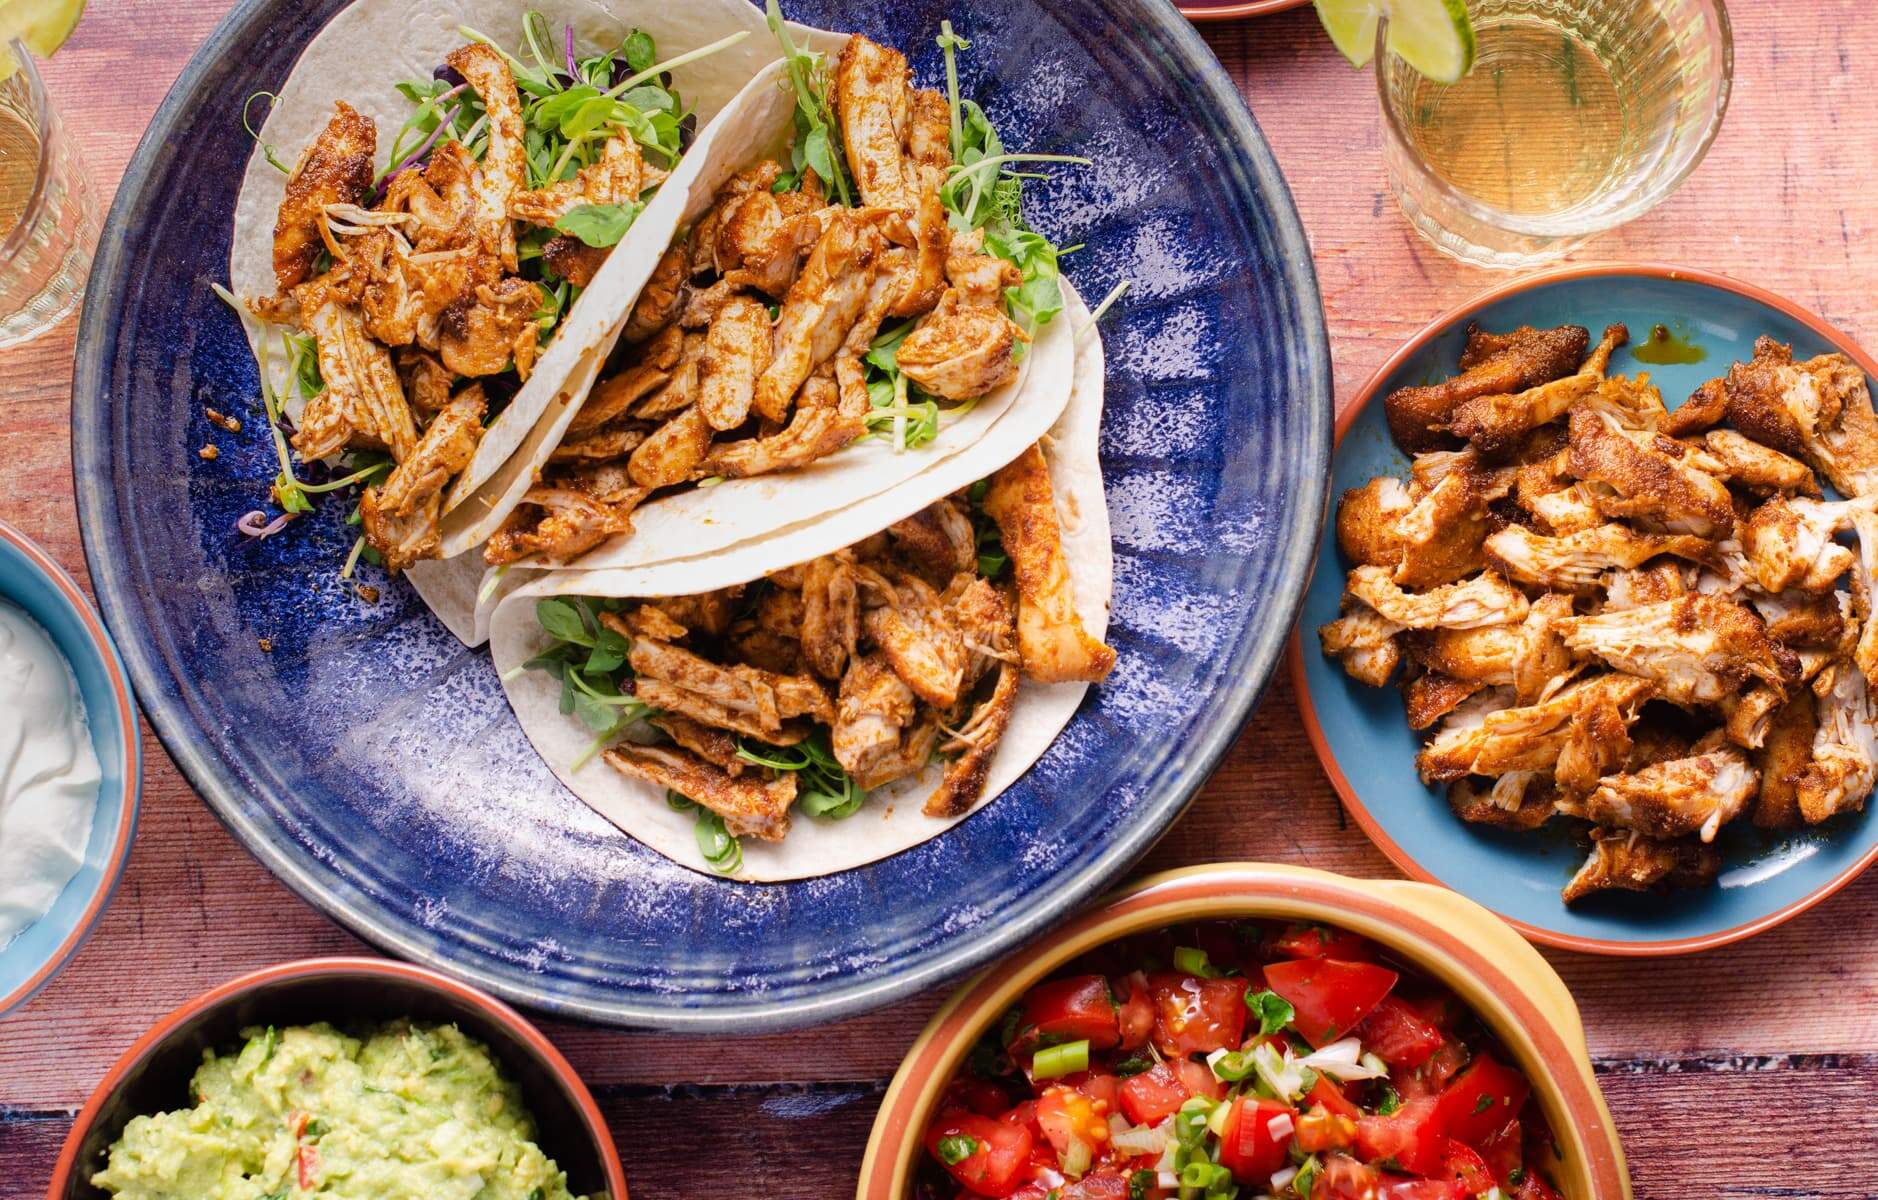 a vibrant table setting for a taco party including chicken tacos on a bright blue platter, salsa, guacamole and more shredded chicken.